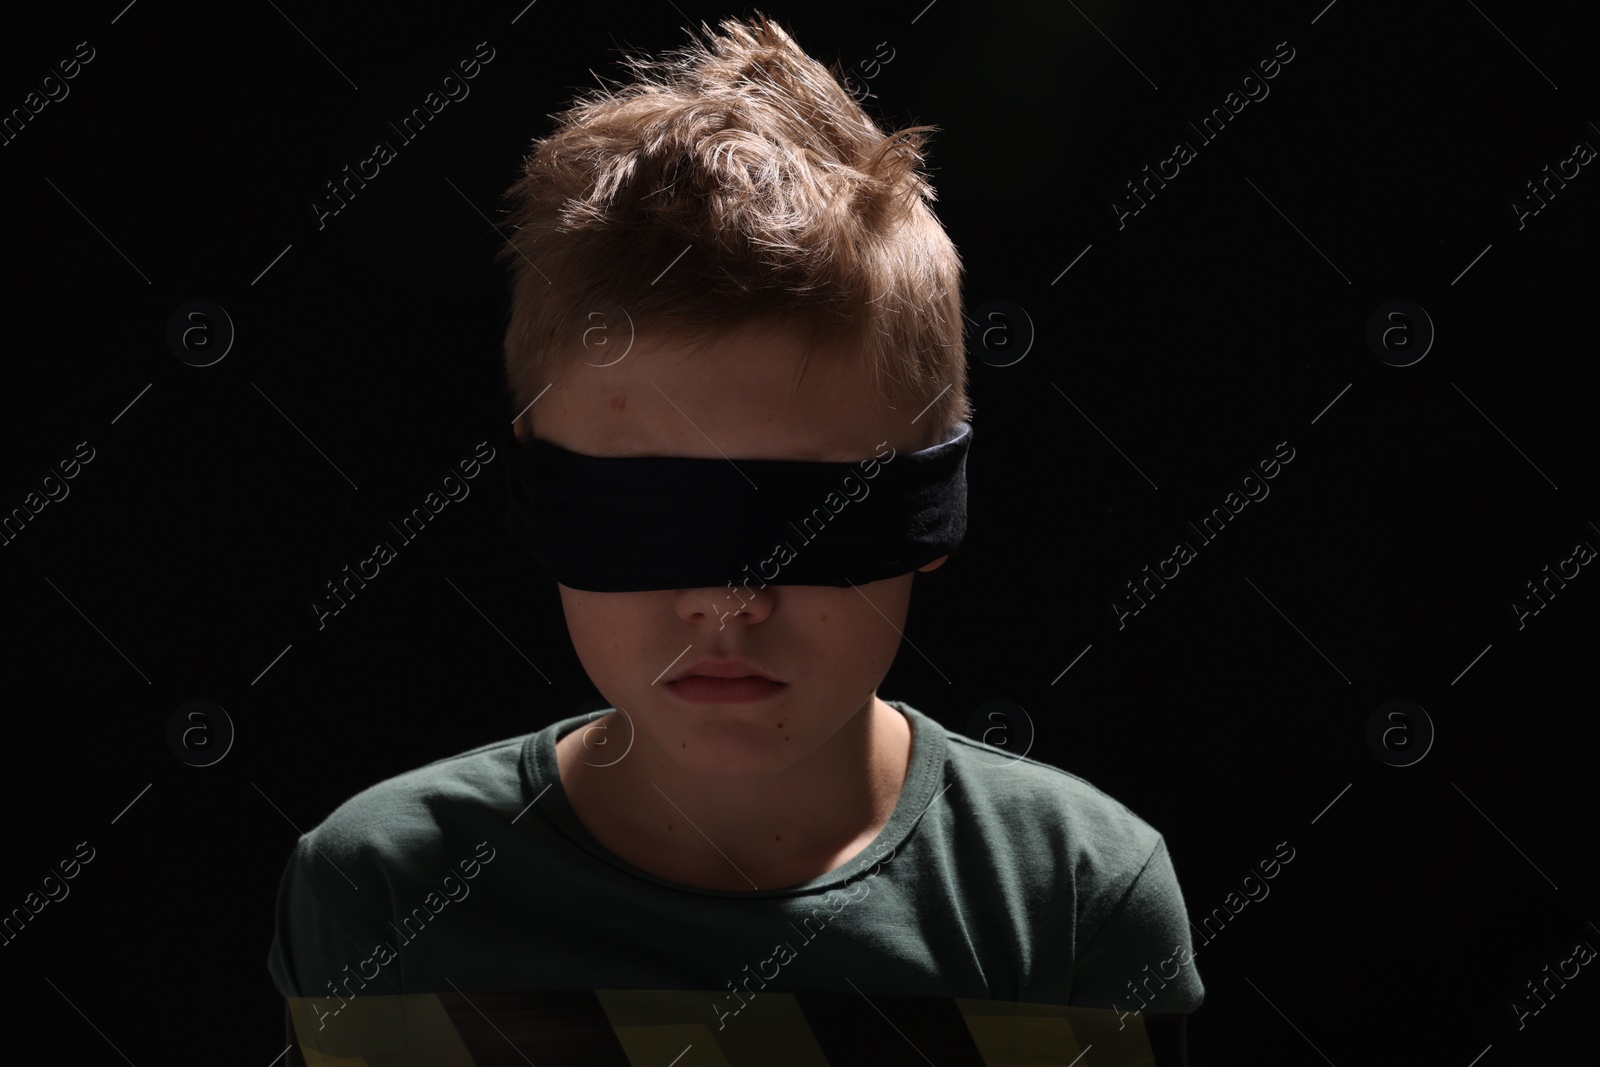 Photo of Blindfolded little boy tied up and taken hostage against dark background